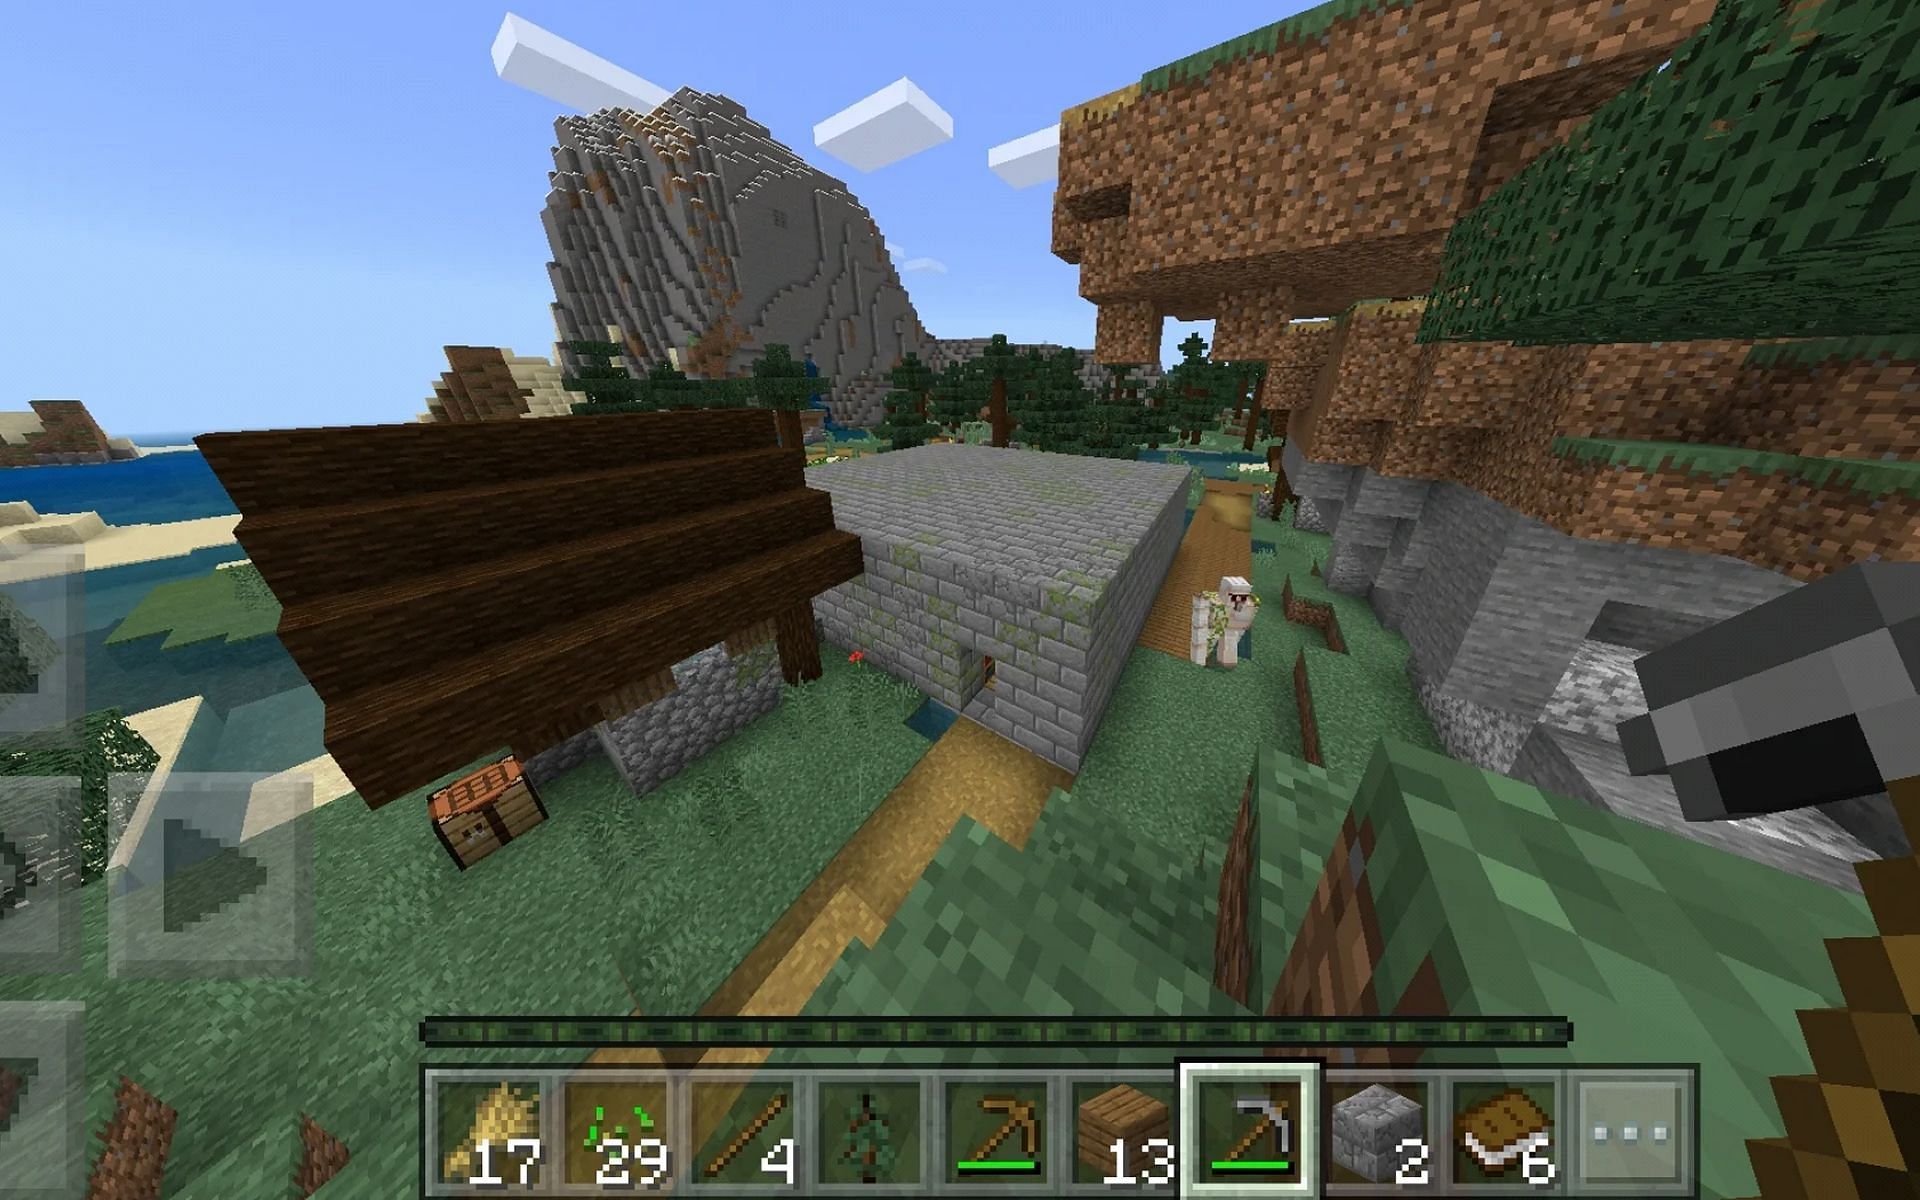 Exposed strongholds are a rare occurrence in-game. Image via Minecraft.